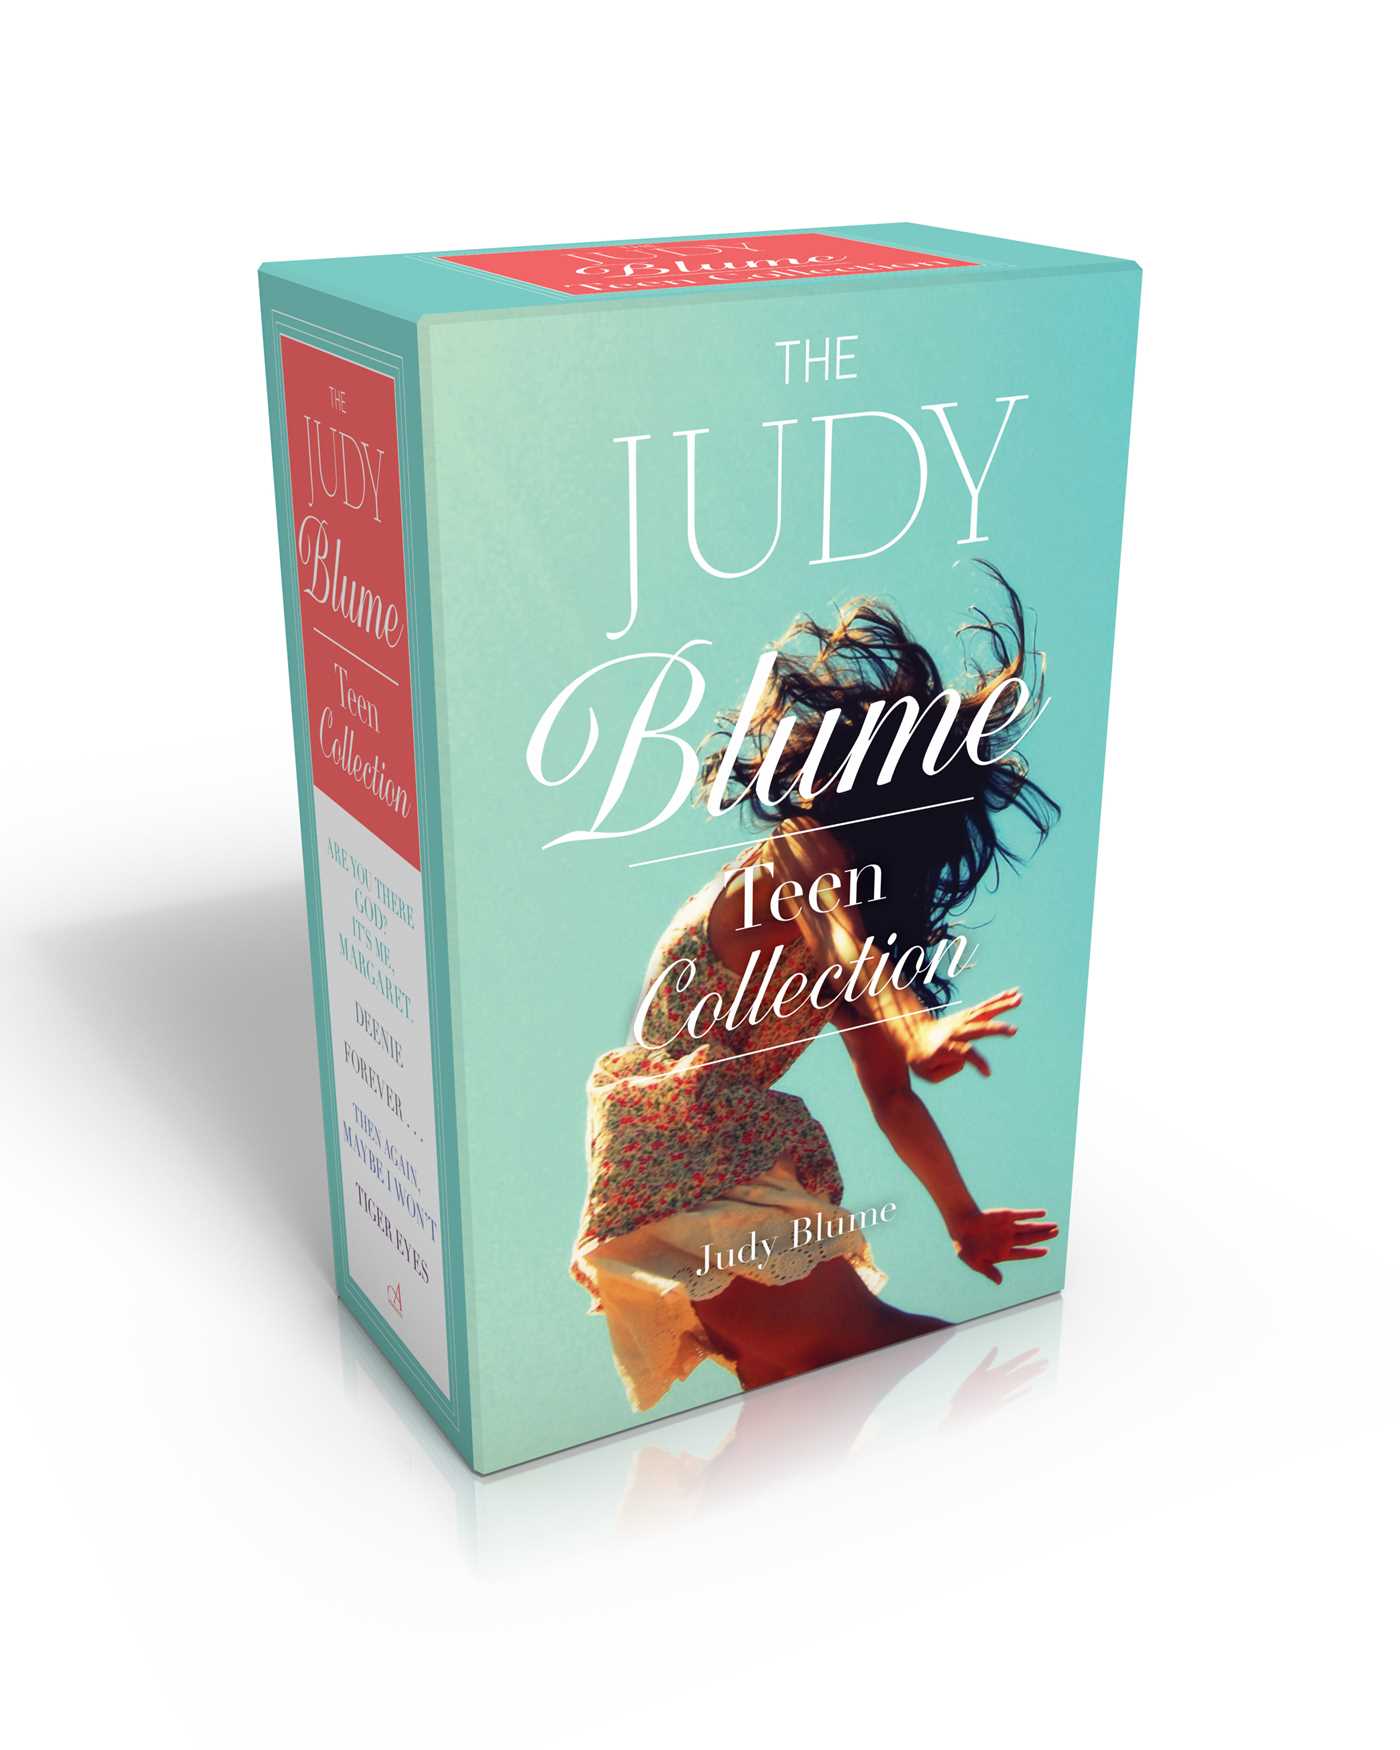 The Judy Blume Teen Collection (Boxed Set)